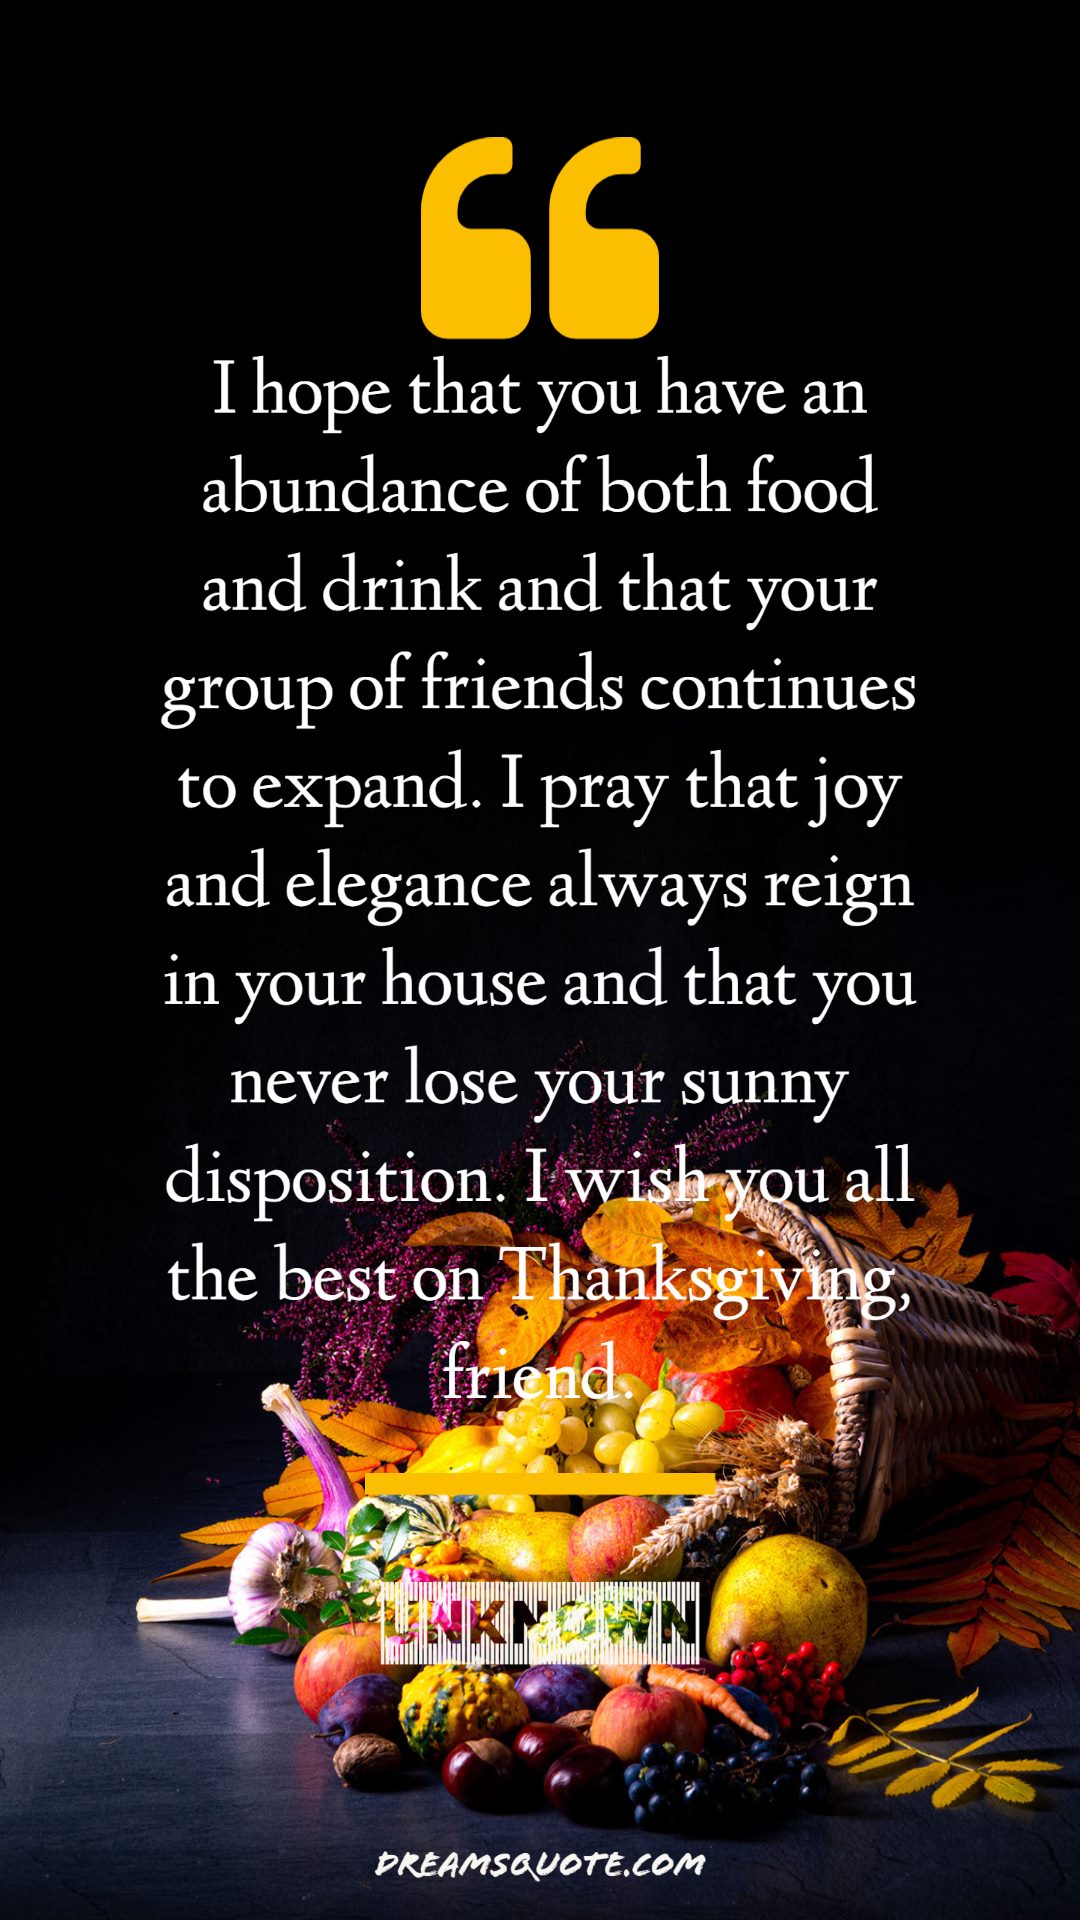 what are some good thanksgiving sayings and thanks giving message to family members